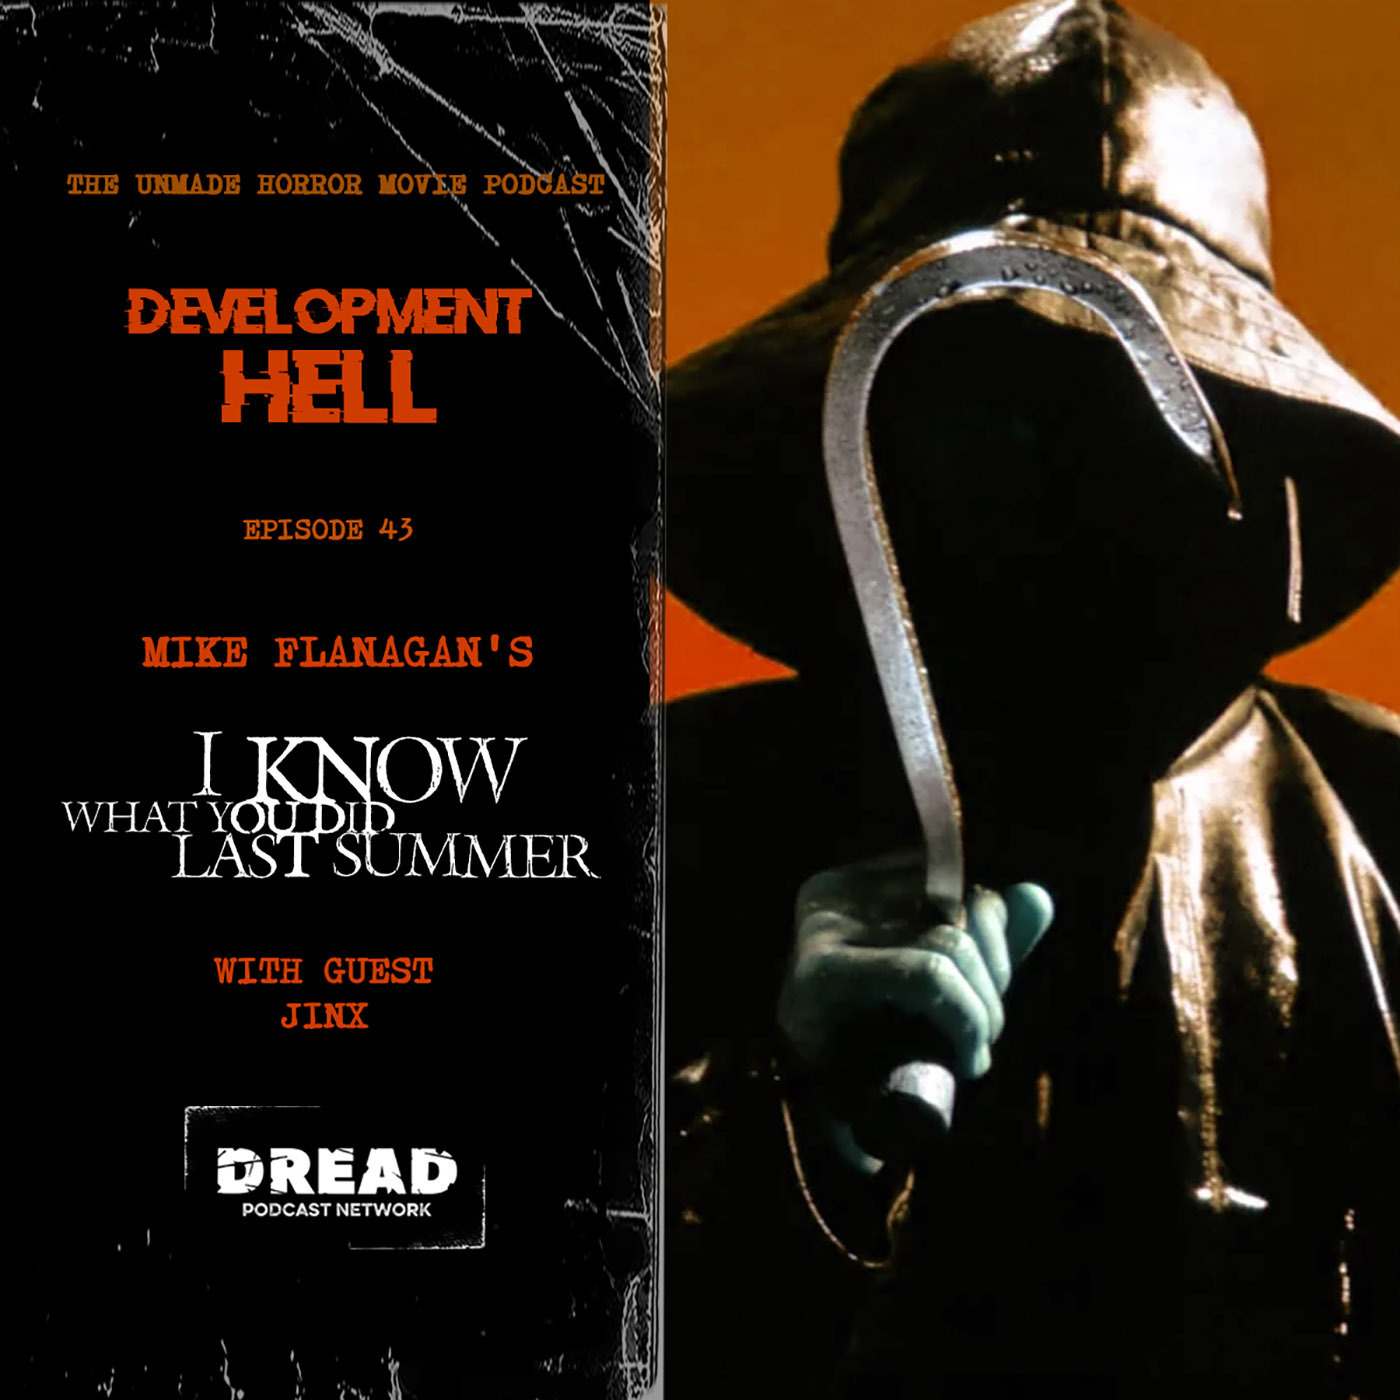 Mike Flanagan's I KNOW WHAT YOU DID LAST SUMMER Reboot (with Jinx)